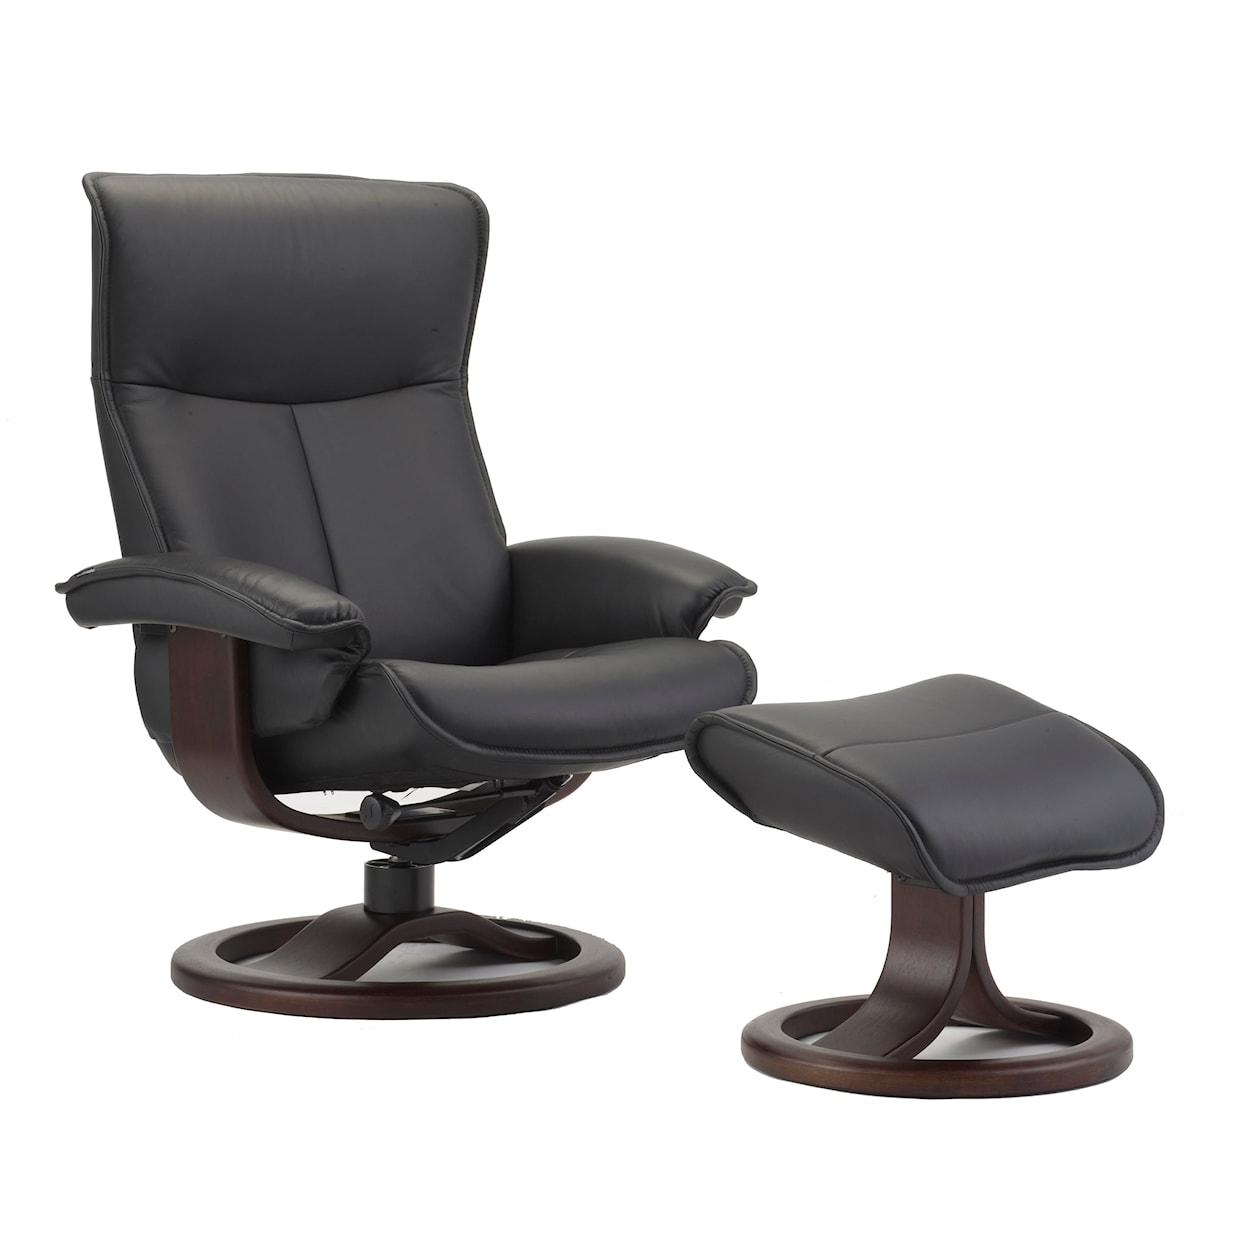 Fjords by Hjellegjerde Classic Comfort Collection Senator R Small Manual Recliner W/ Footstool